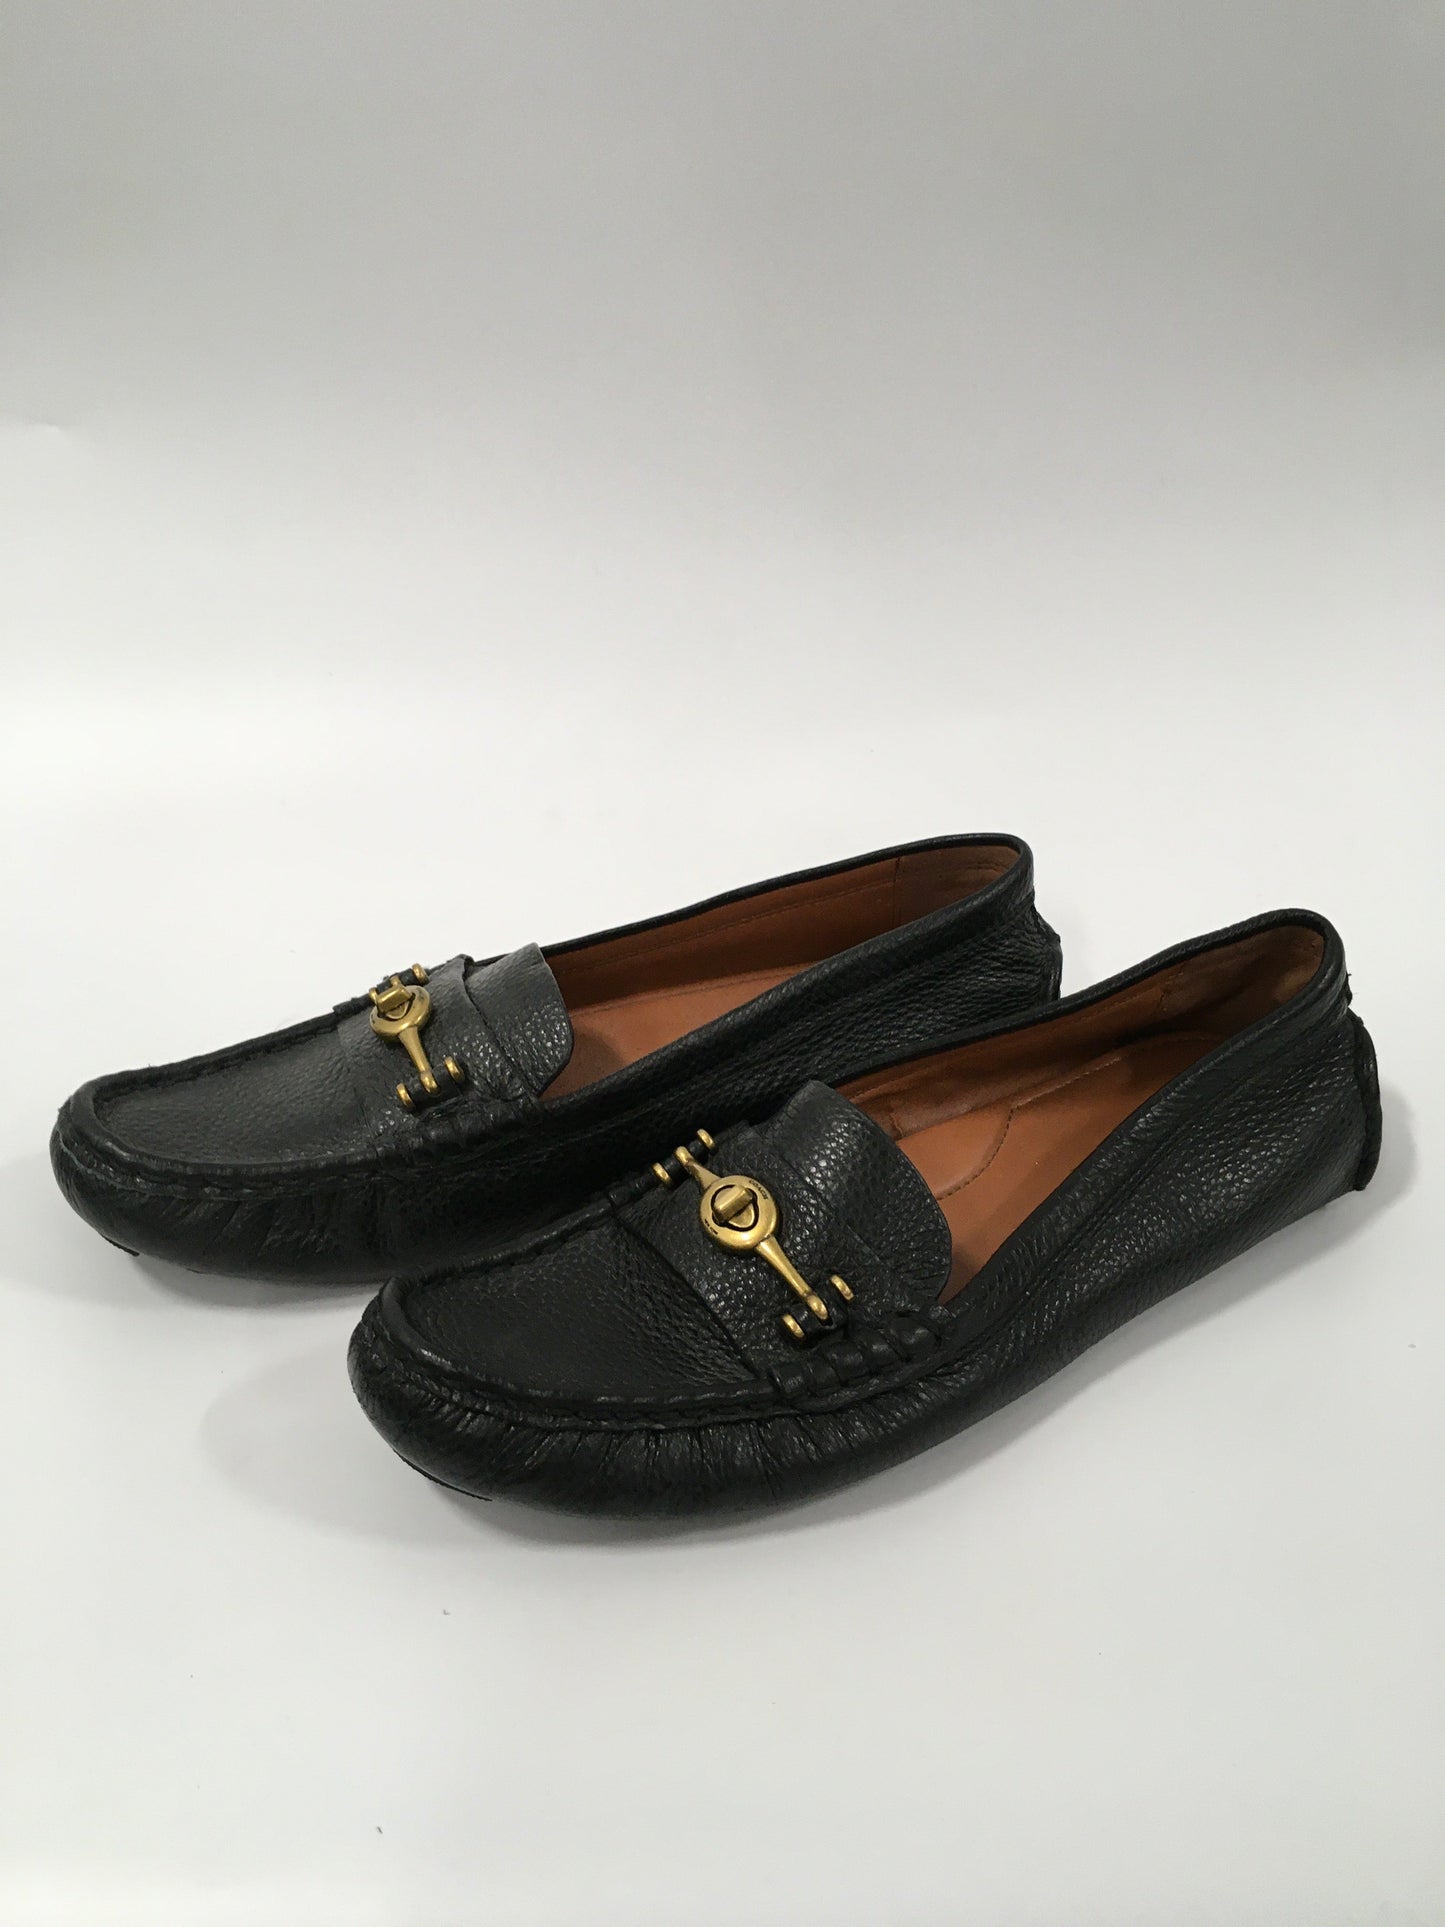 Black Shoes Flats Loafer Oxford Coach, Size 8.5